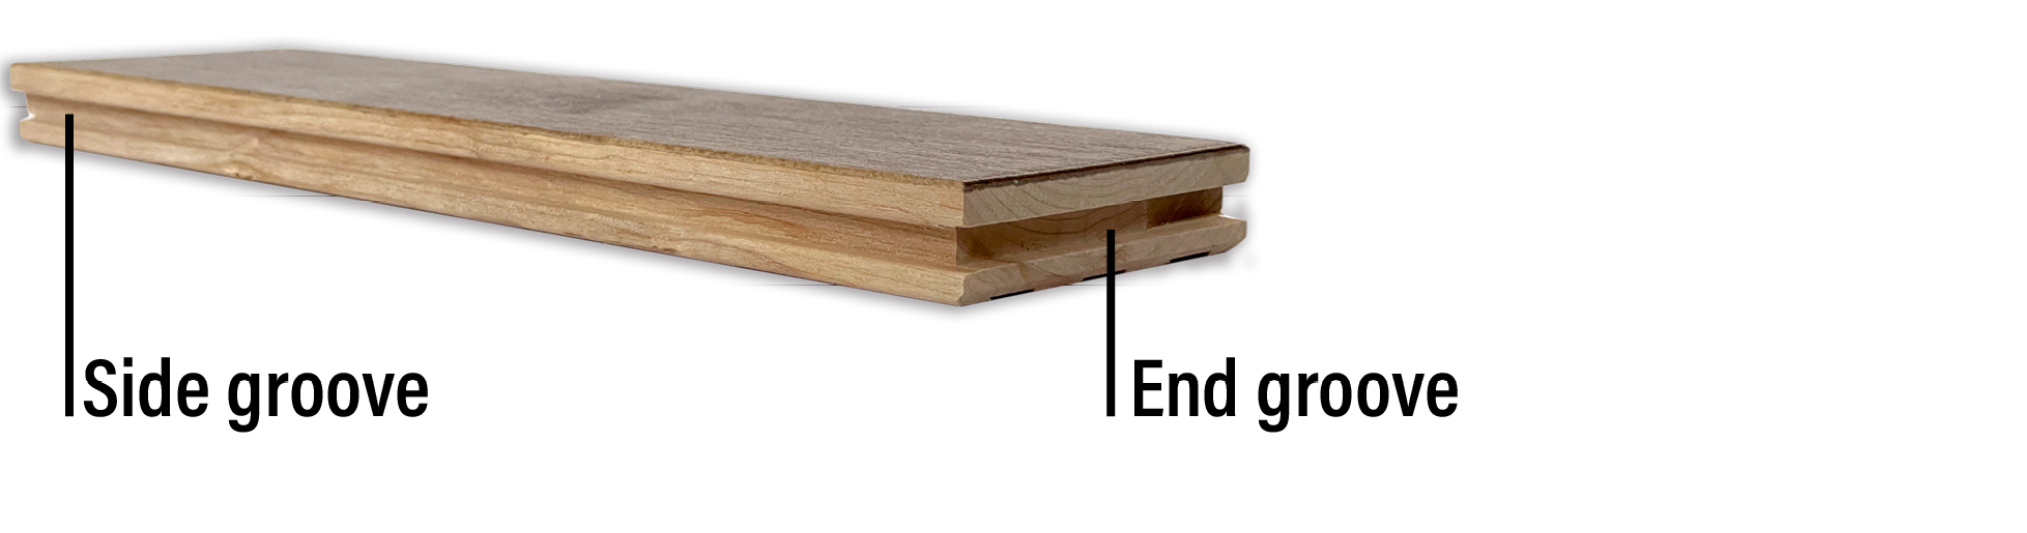 End groove and side groove - PG Flooring